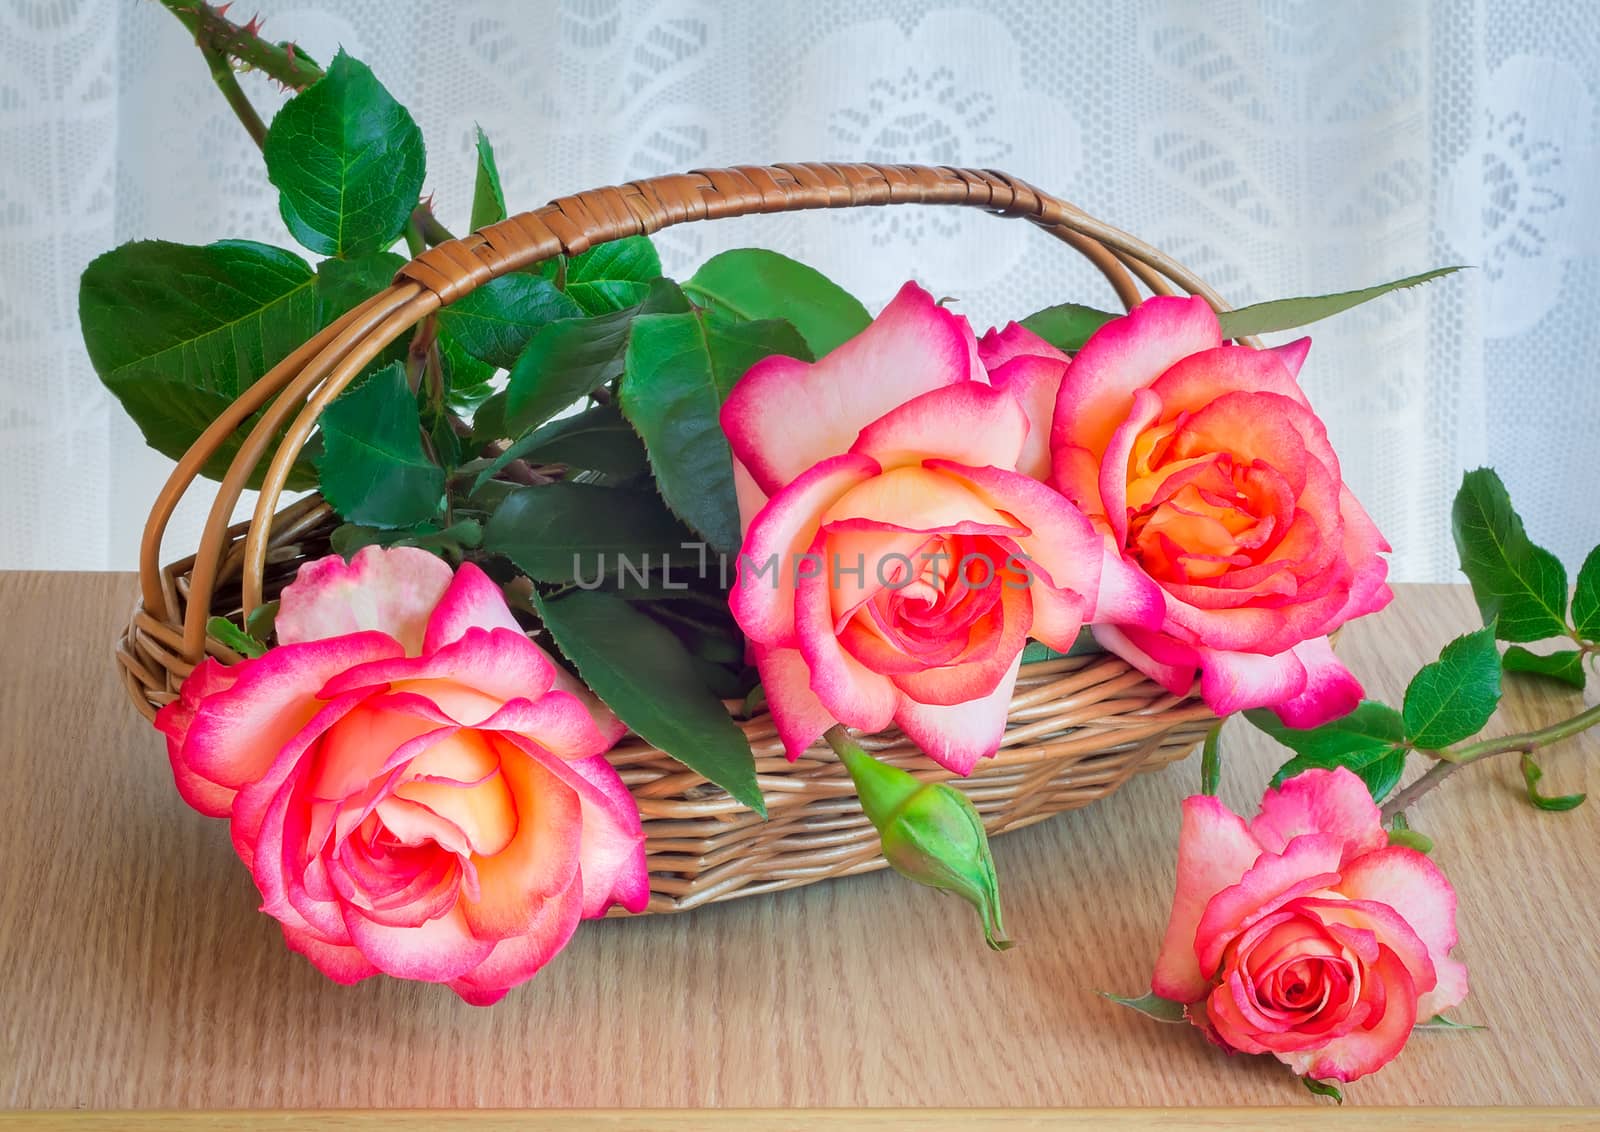 Wicker basket with a beautiful bright roses on the table surface.